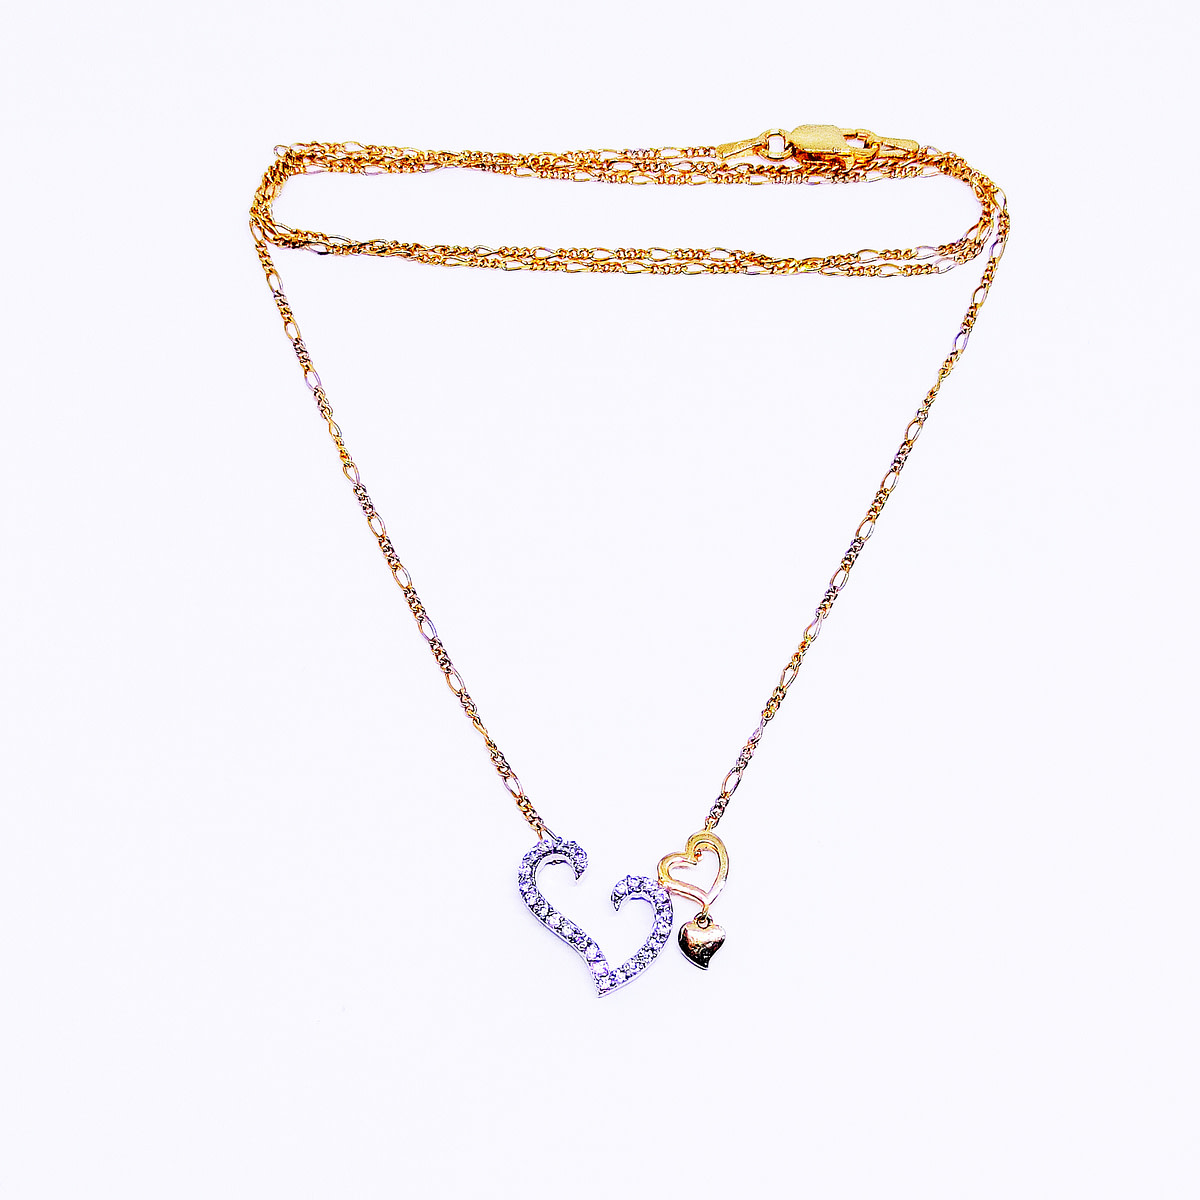 HEART-TO-HEART Pendant with Chain